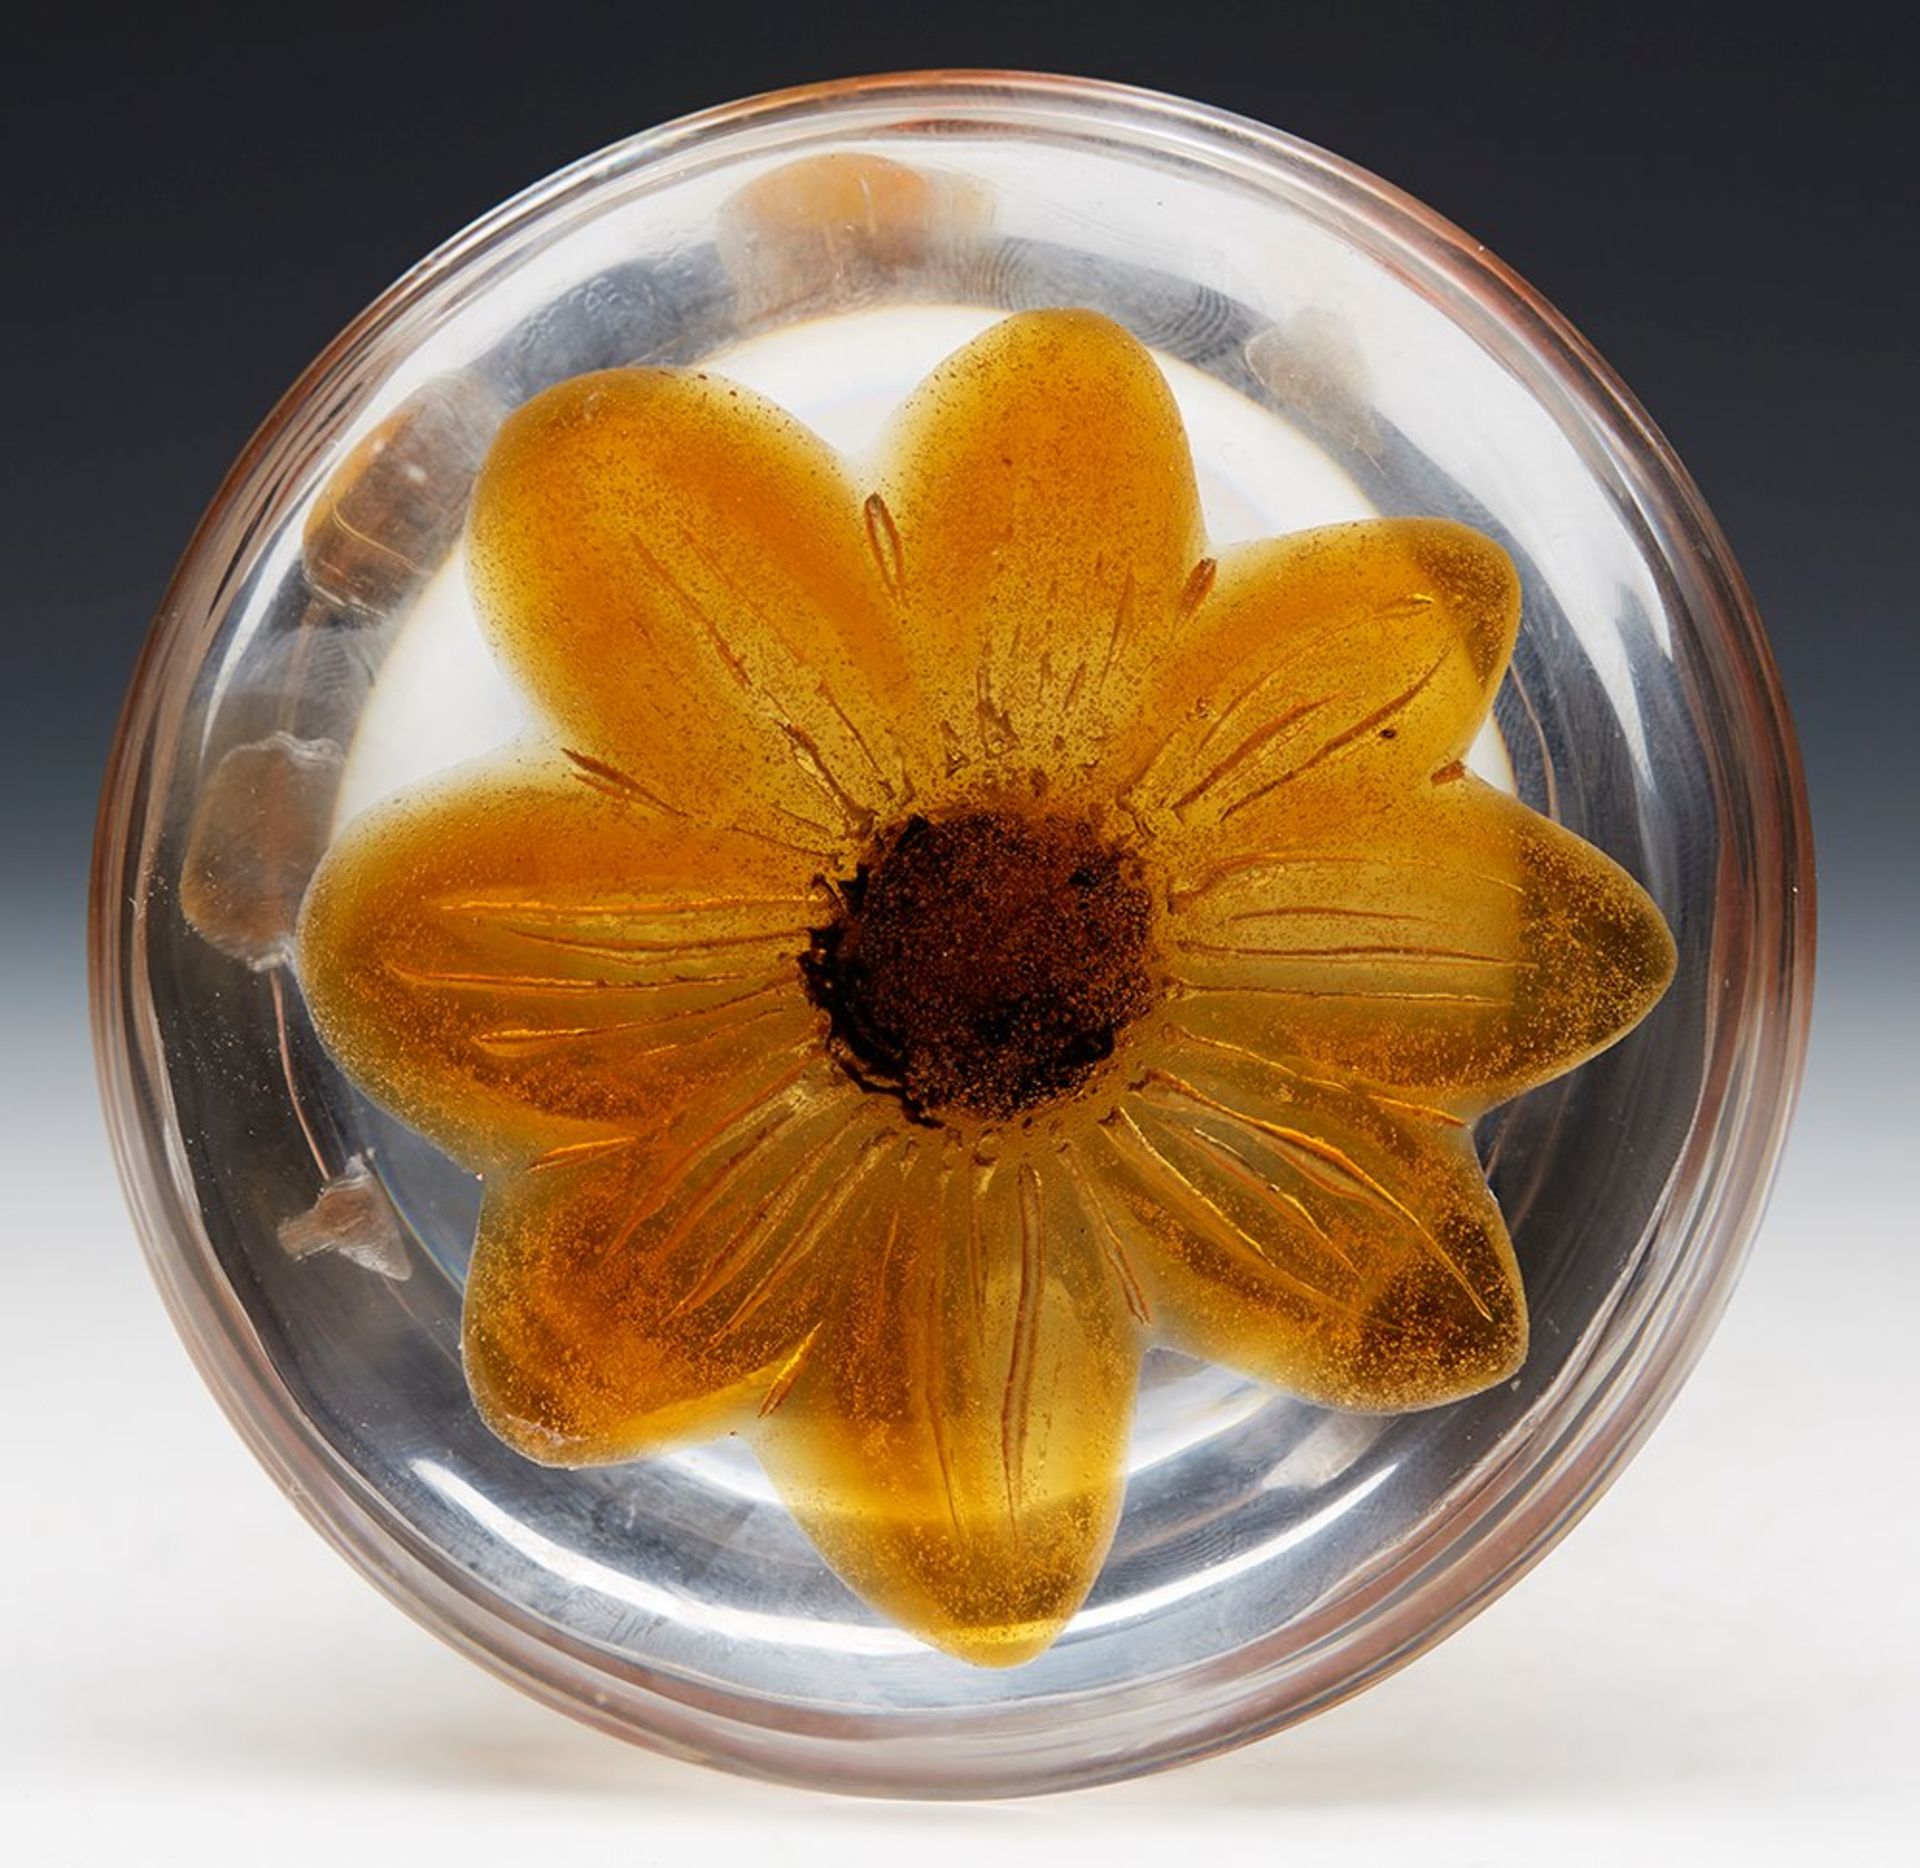 VINTAGE STYLISH FRENCH DAUM FLORAL GLASS PAPERWEIGHT 20TH C. - Image 5 of 7